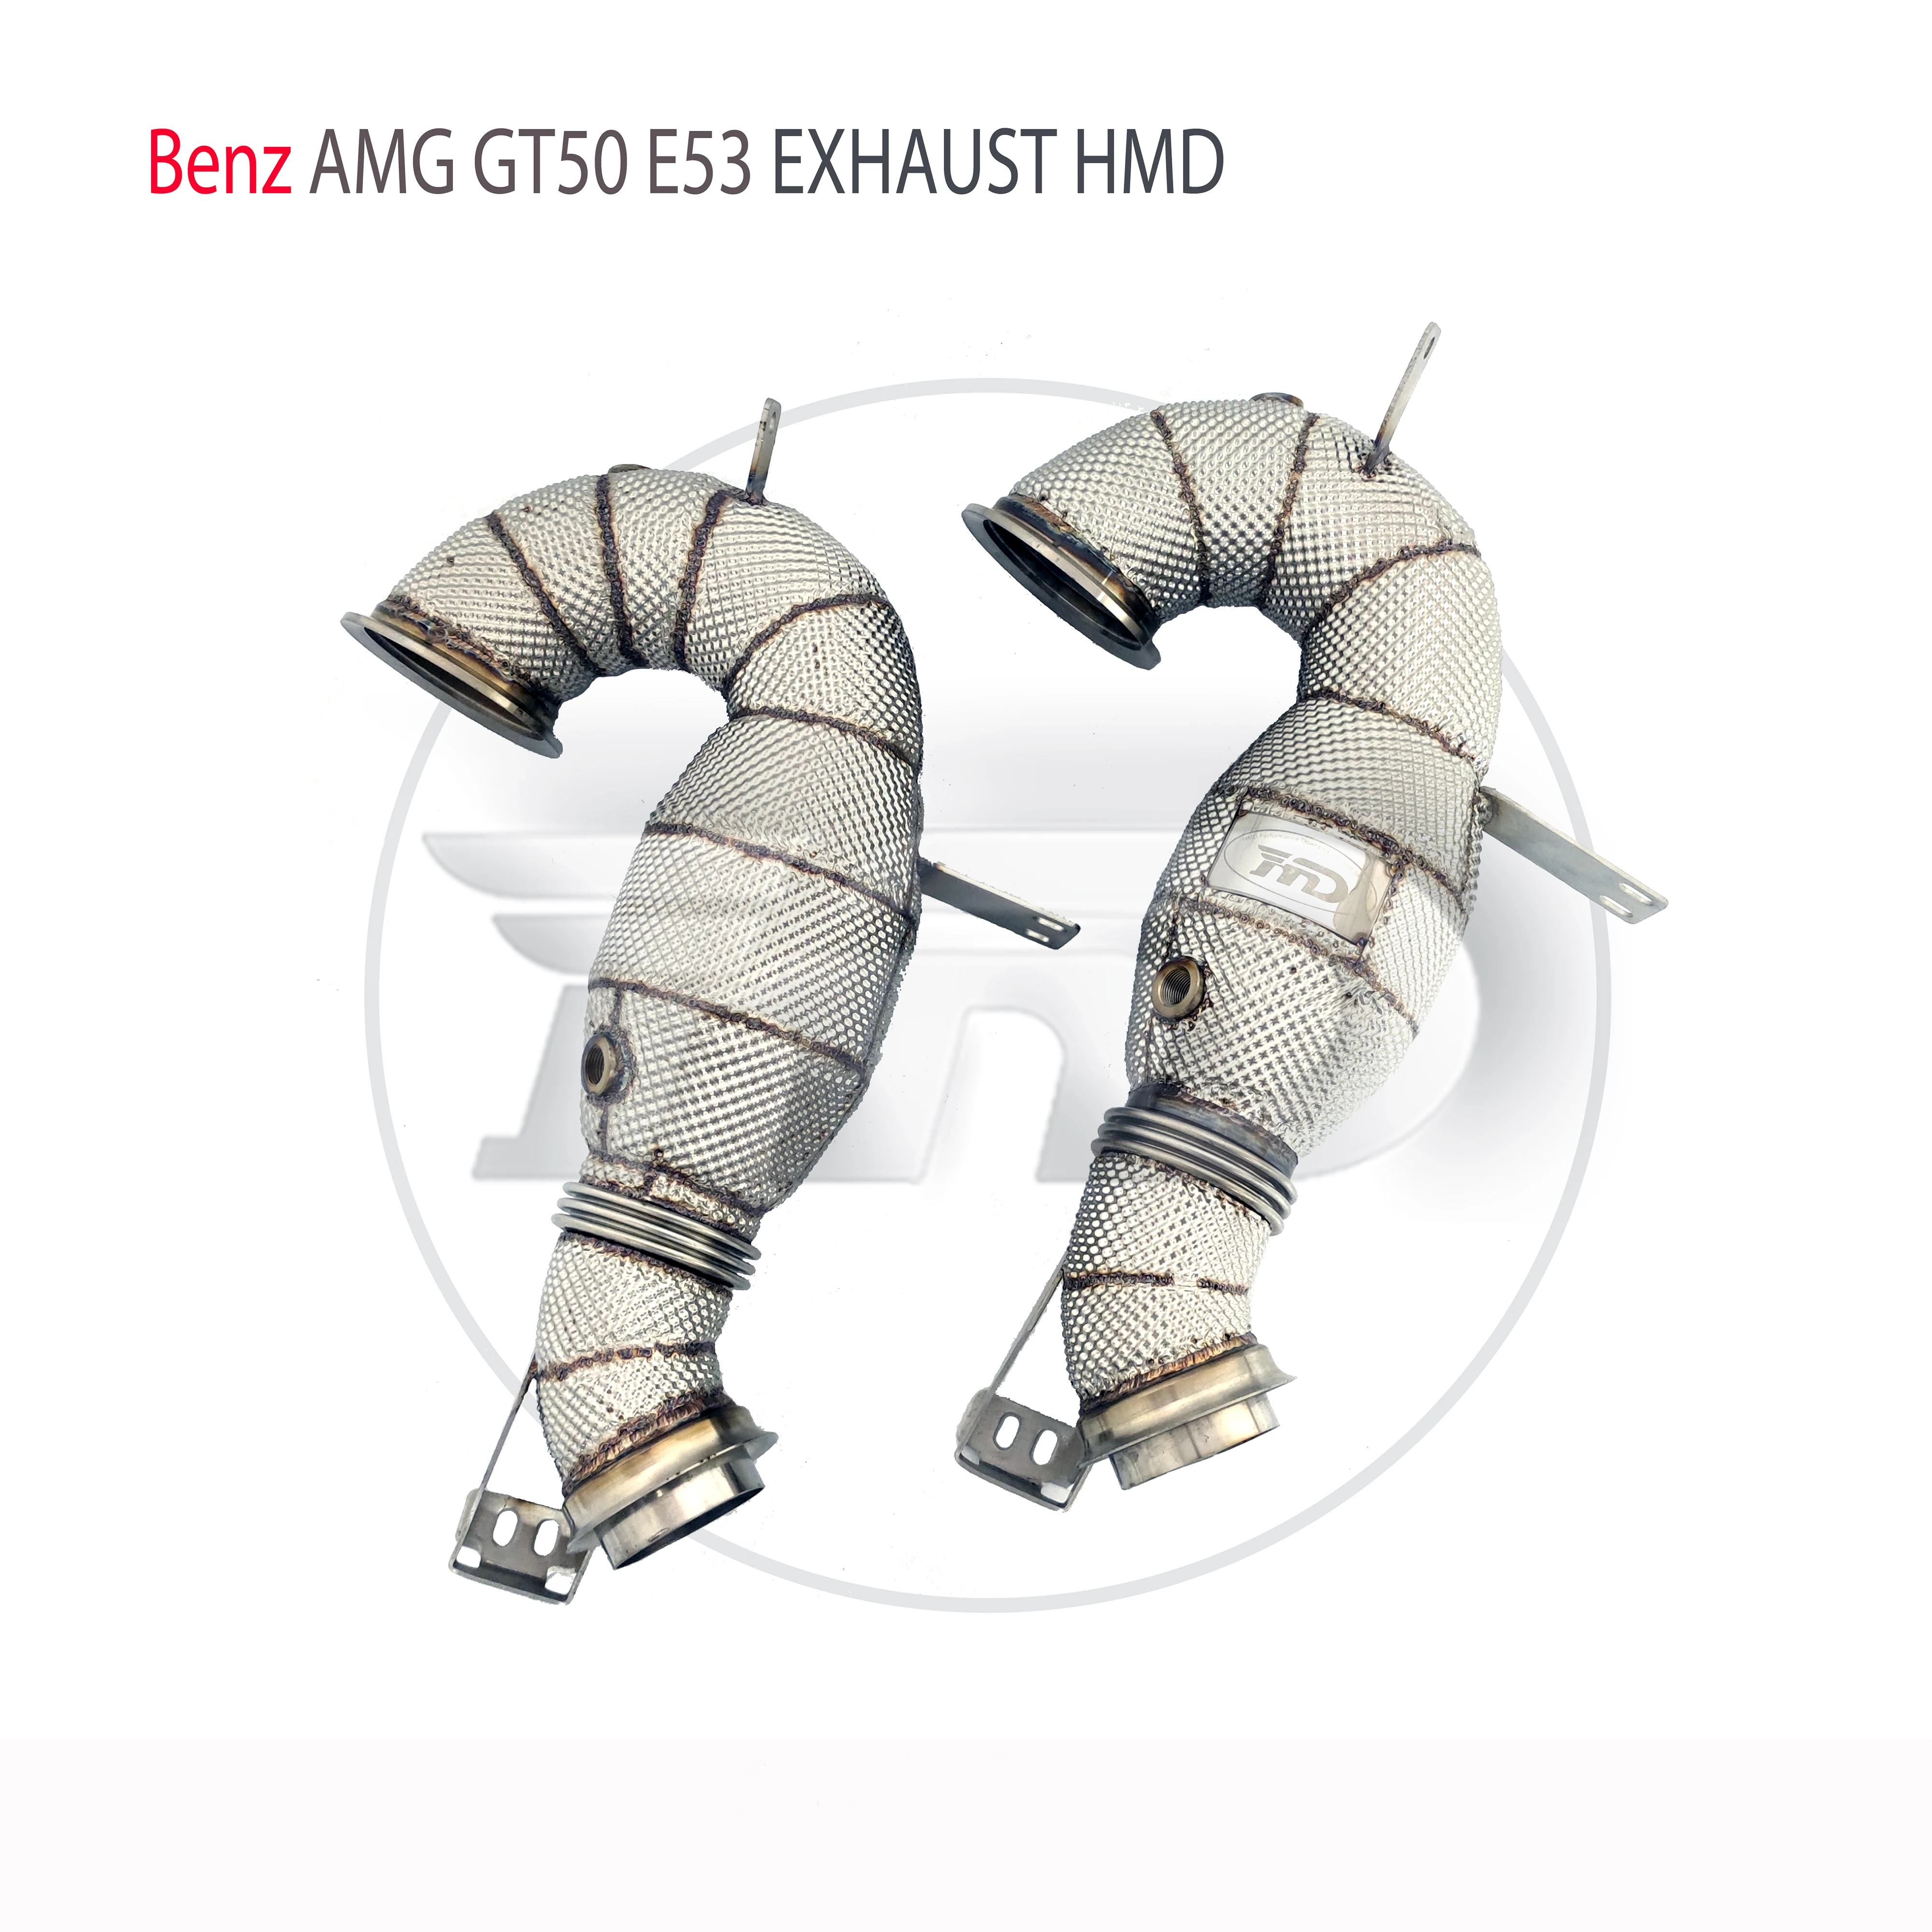 

HMD Exhaust System High Flow Performance Downpipe for Benz AMG GT50 E53 CLS450 M256 Engine 3.0T